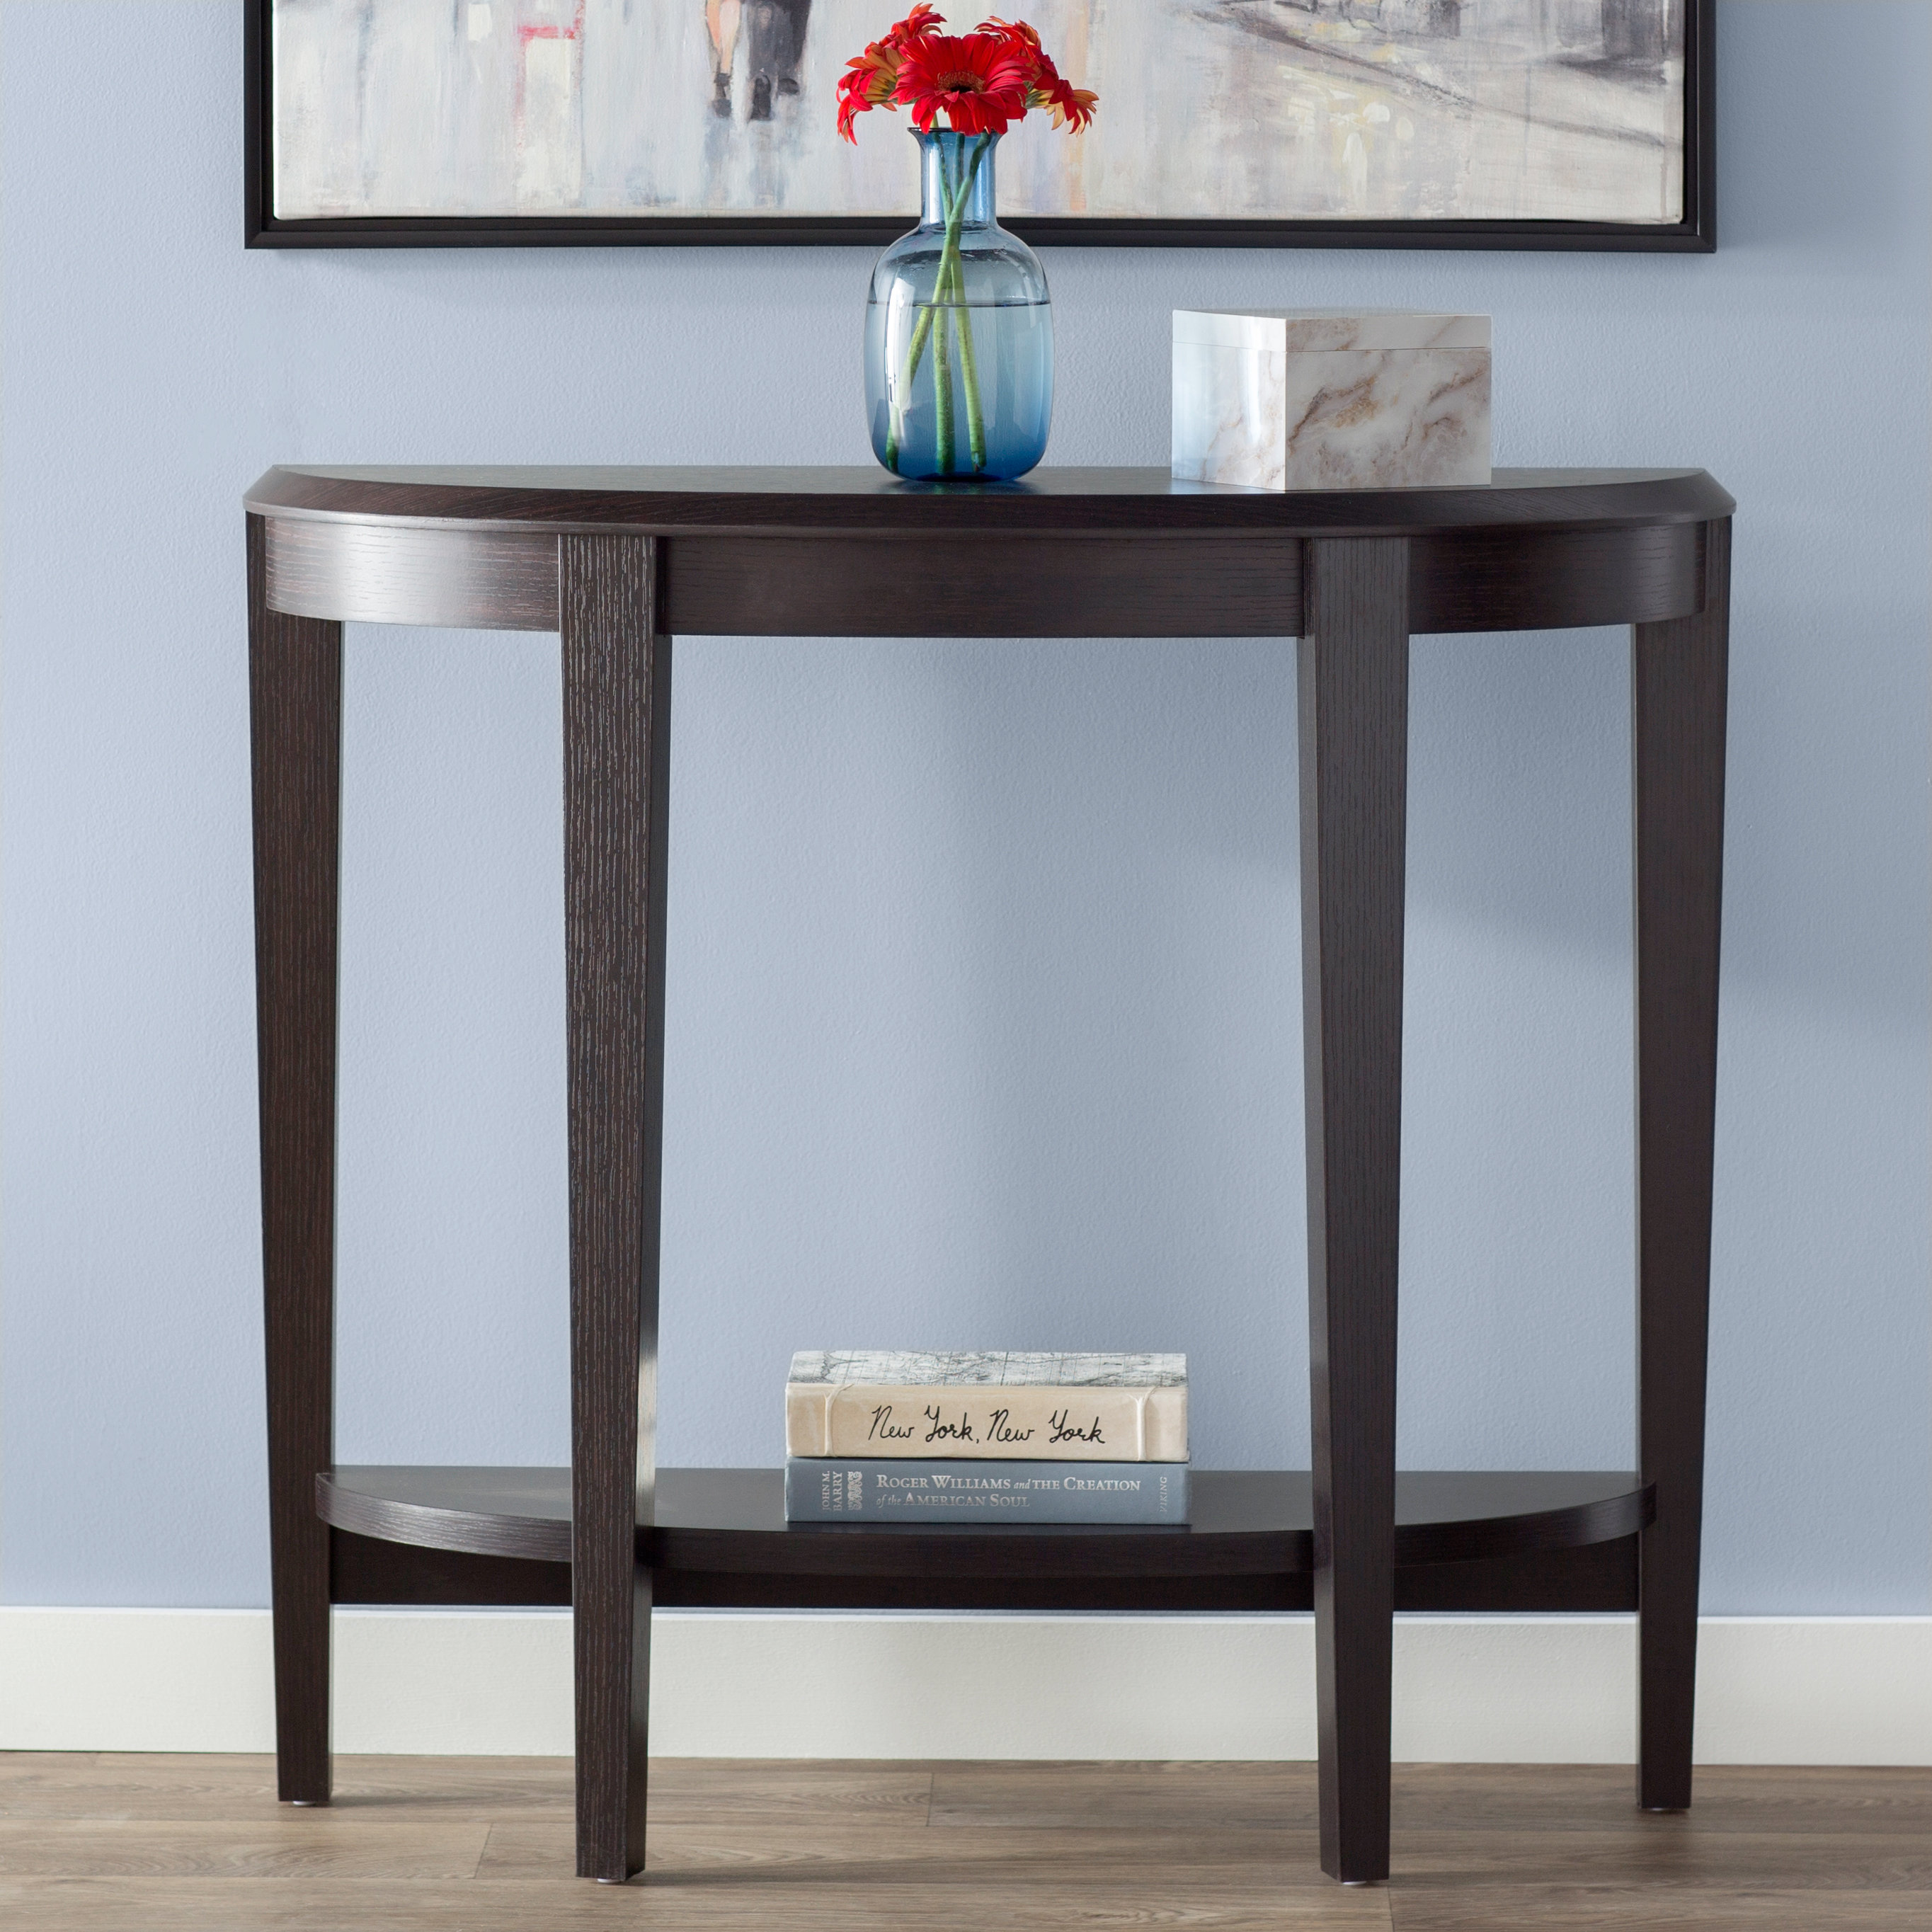 andover mills blakeway half moon console table reviews small accent fireplace chairs dog kennel end mirrored wicker garden deck furniture gallerie couch patio shade structures